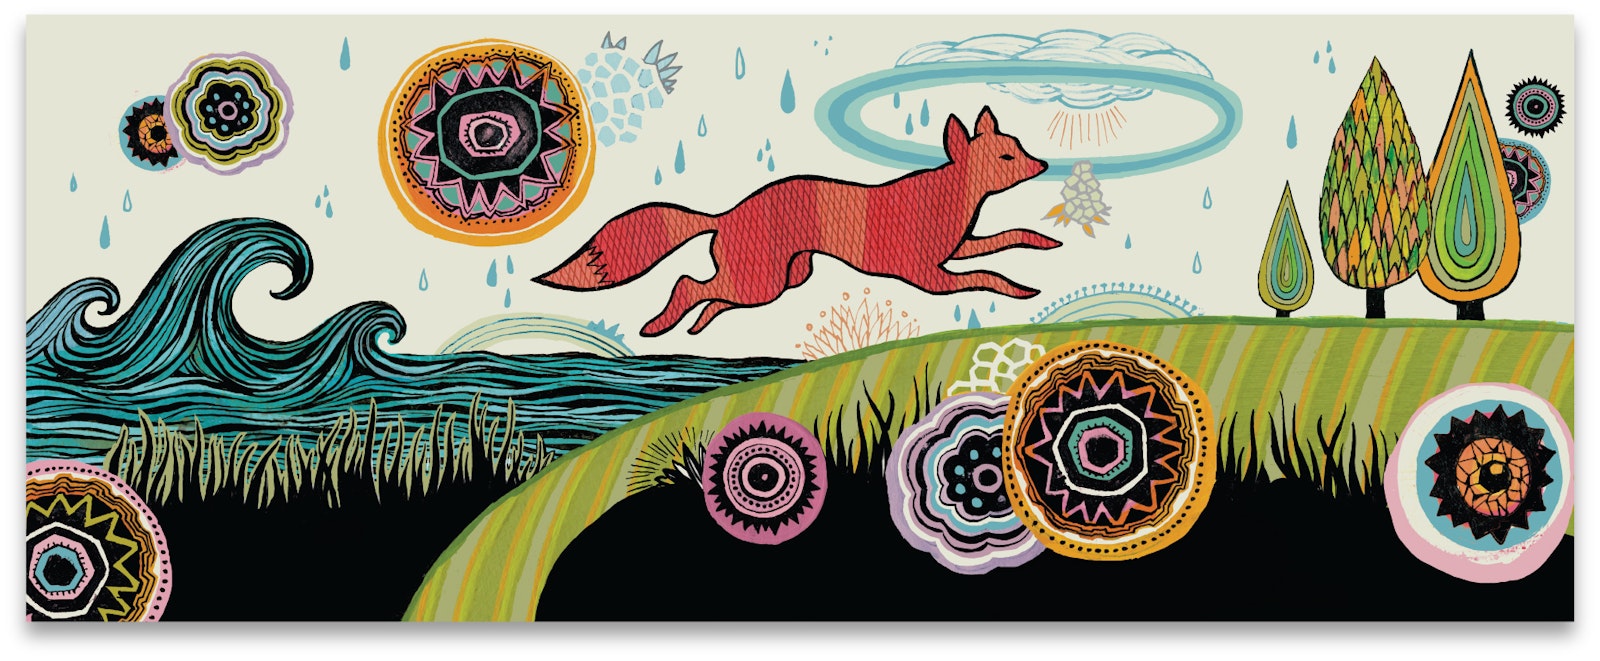 Fox River Socks illustration design with fox running through field with flowers and trees.